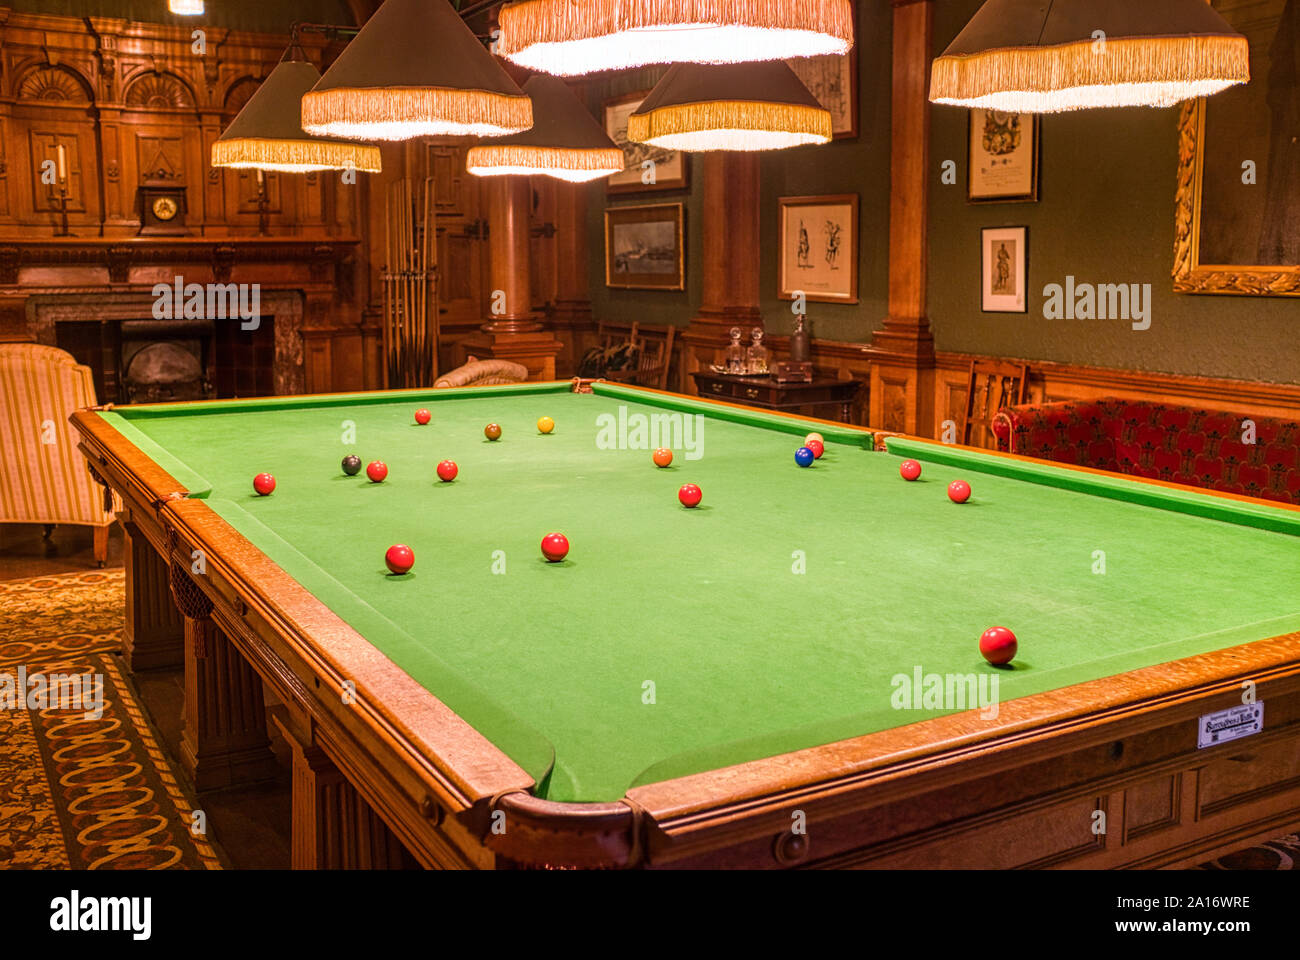 Snooker table in the snooker room at Cragside House, Northumberland, UK Stock Photo